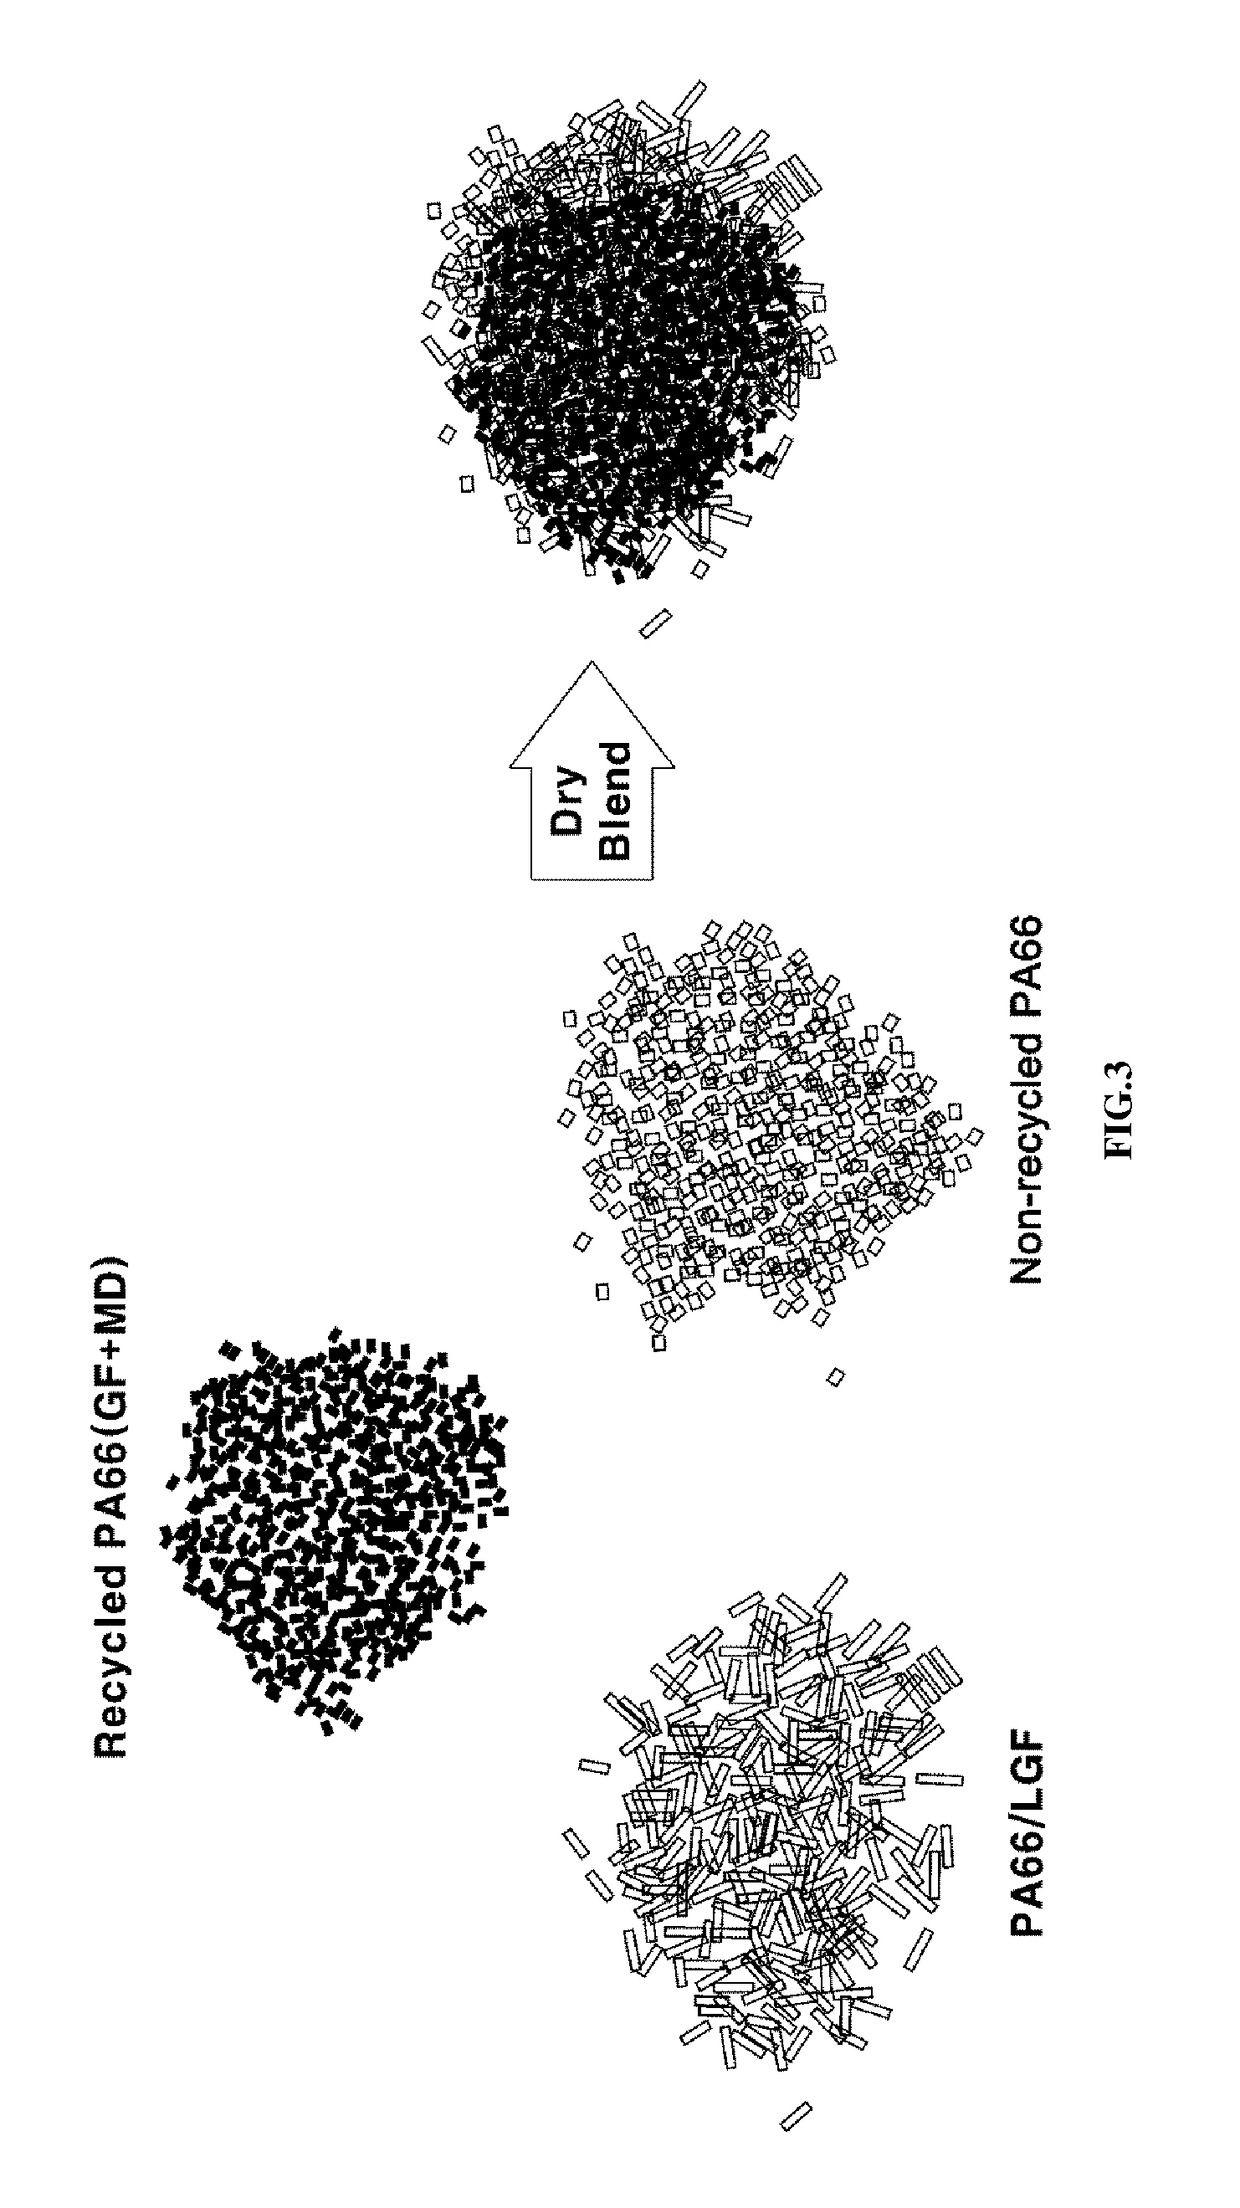 Polyamide resin composition comprising fiber reinforced polyamide pellet and molded article thereof